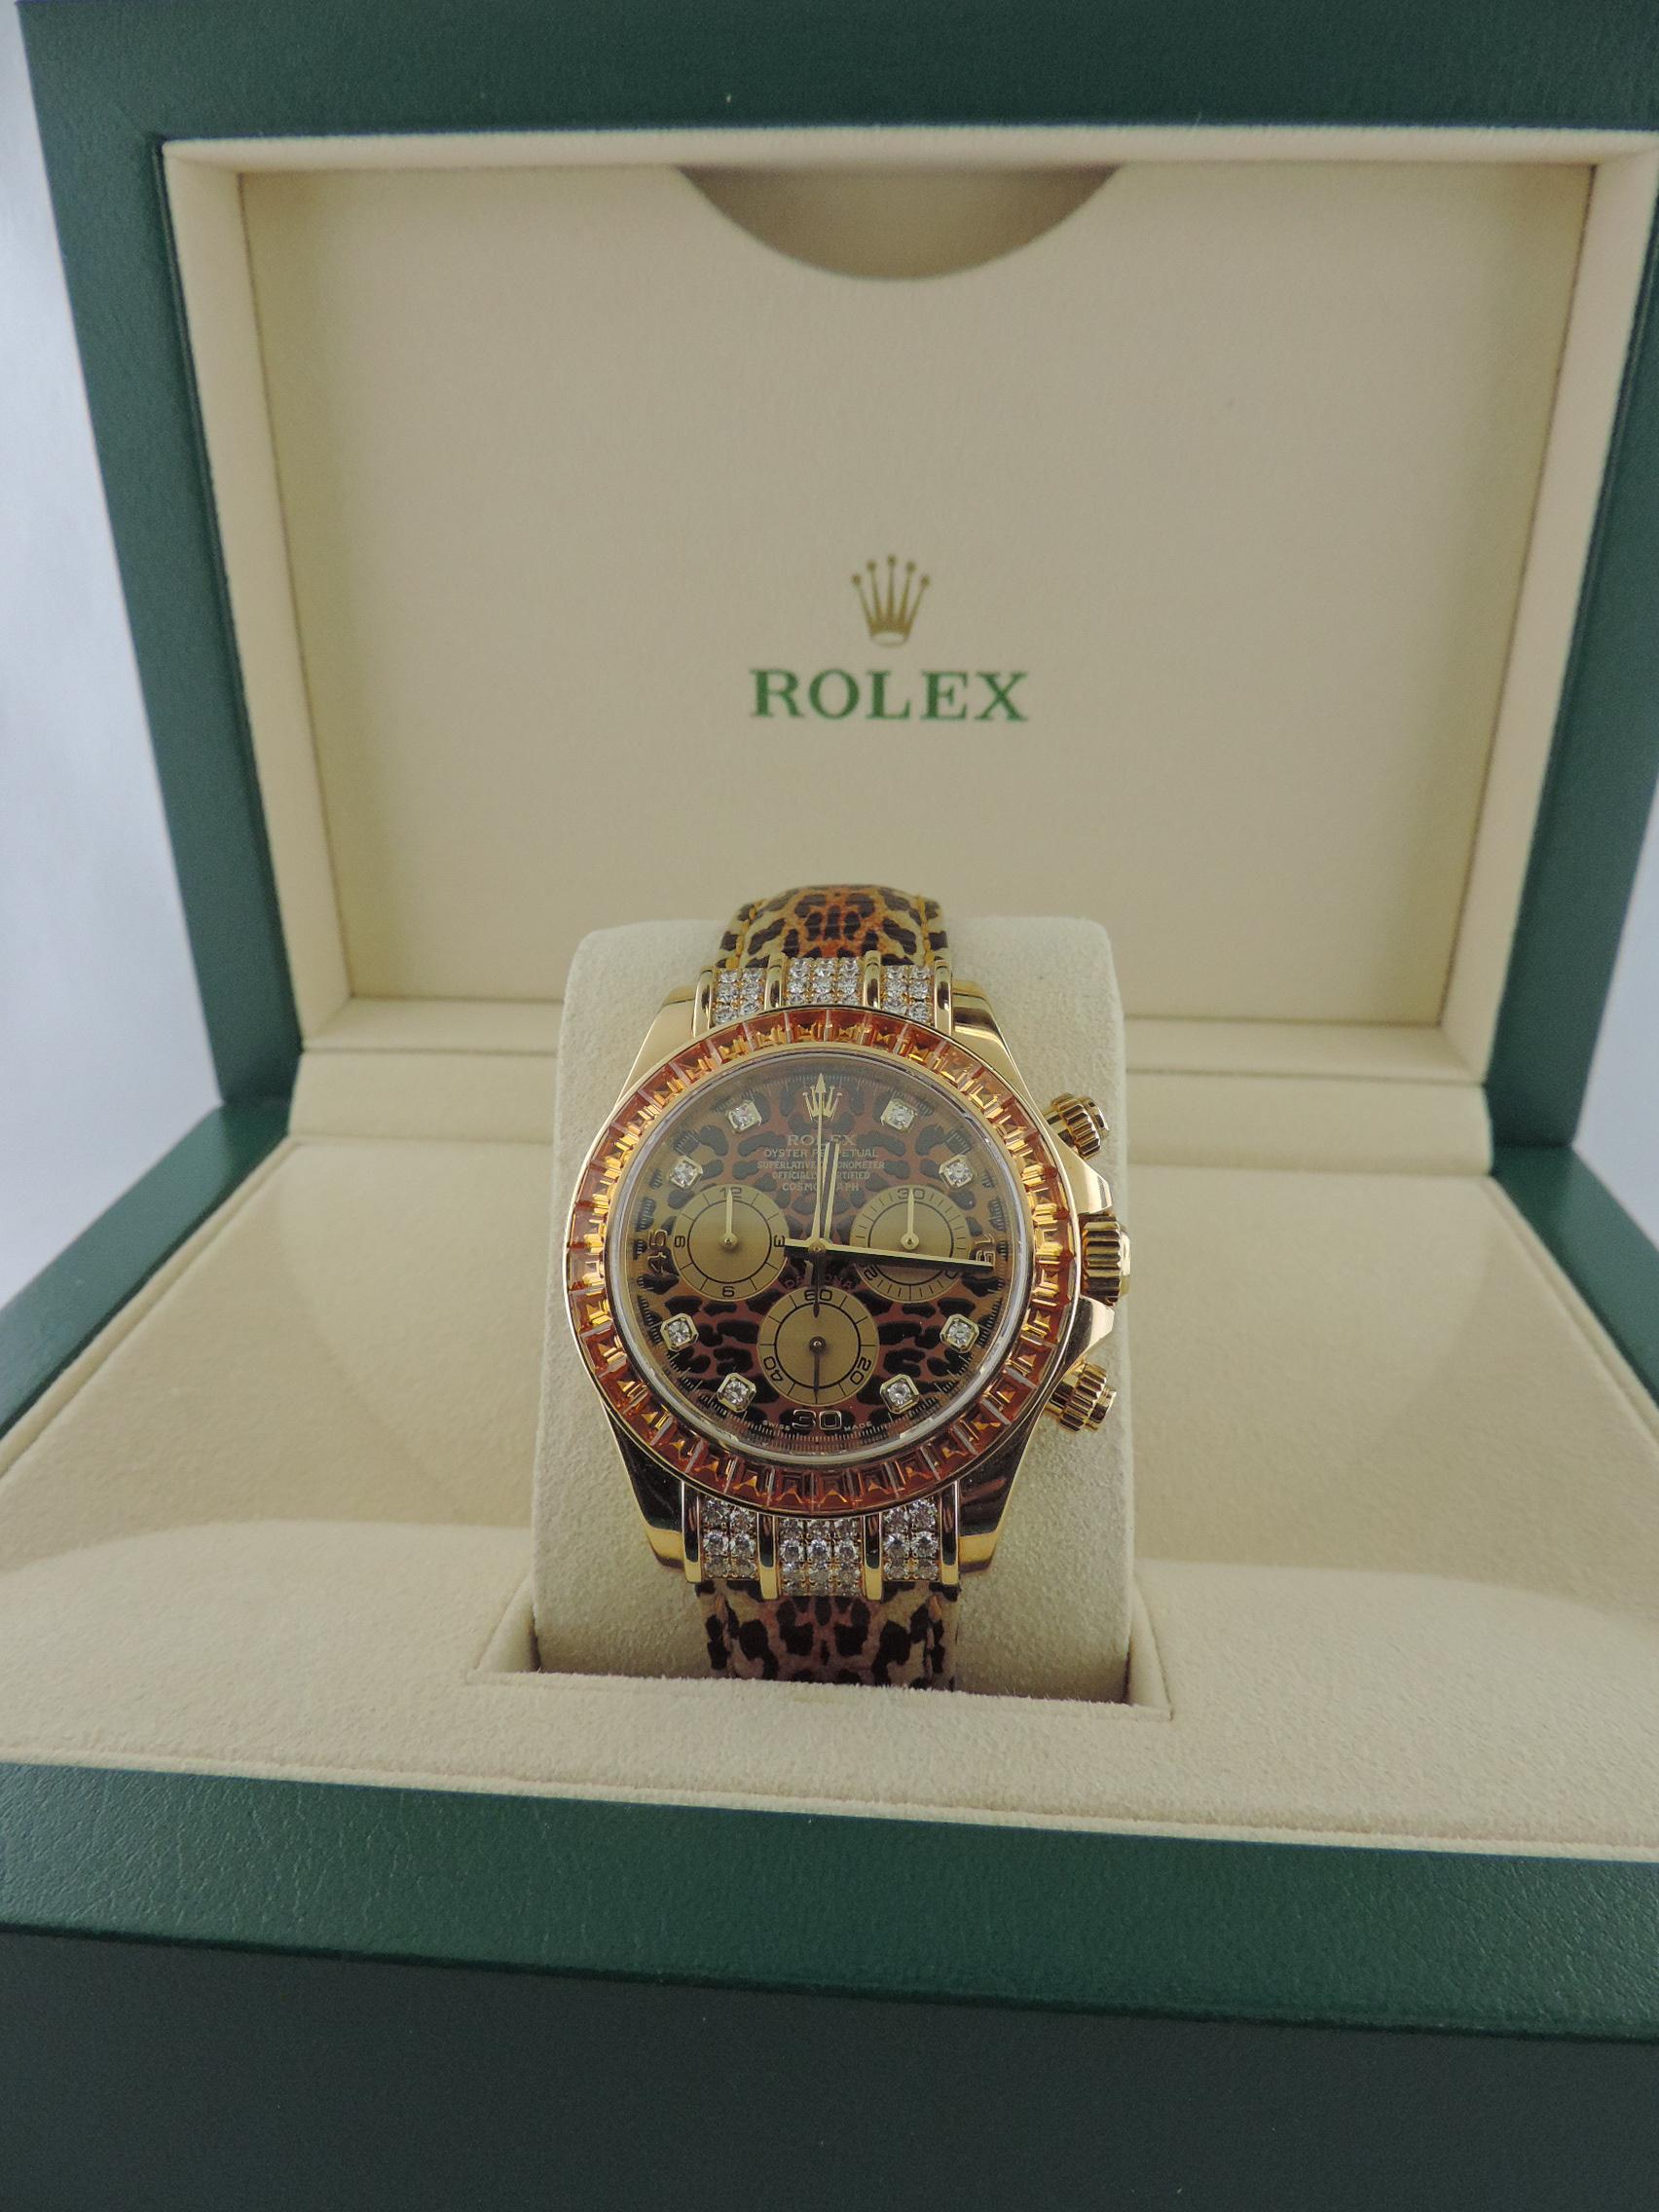 18K GOLD LEOPARD DAYTONA 

IMPRESSIVE AND RARE THIS TIMEPIECE IS 100% FACTORY INSTALLED**
(When comparing this watch with others, please make sure you are comparing factory accessories and not aftermarket or 